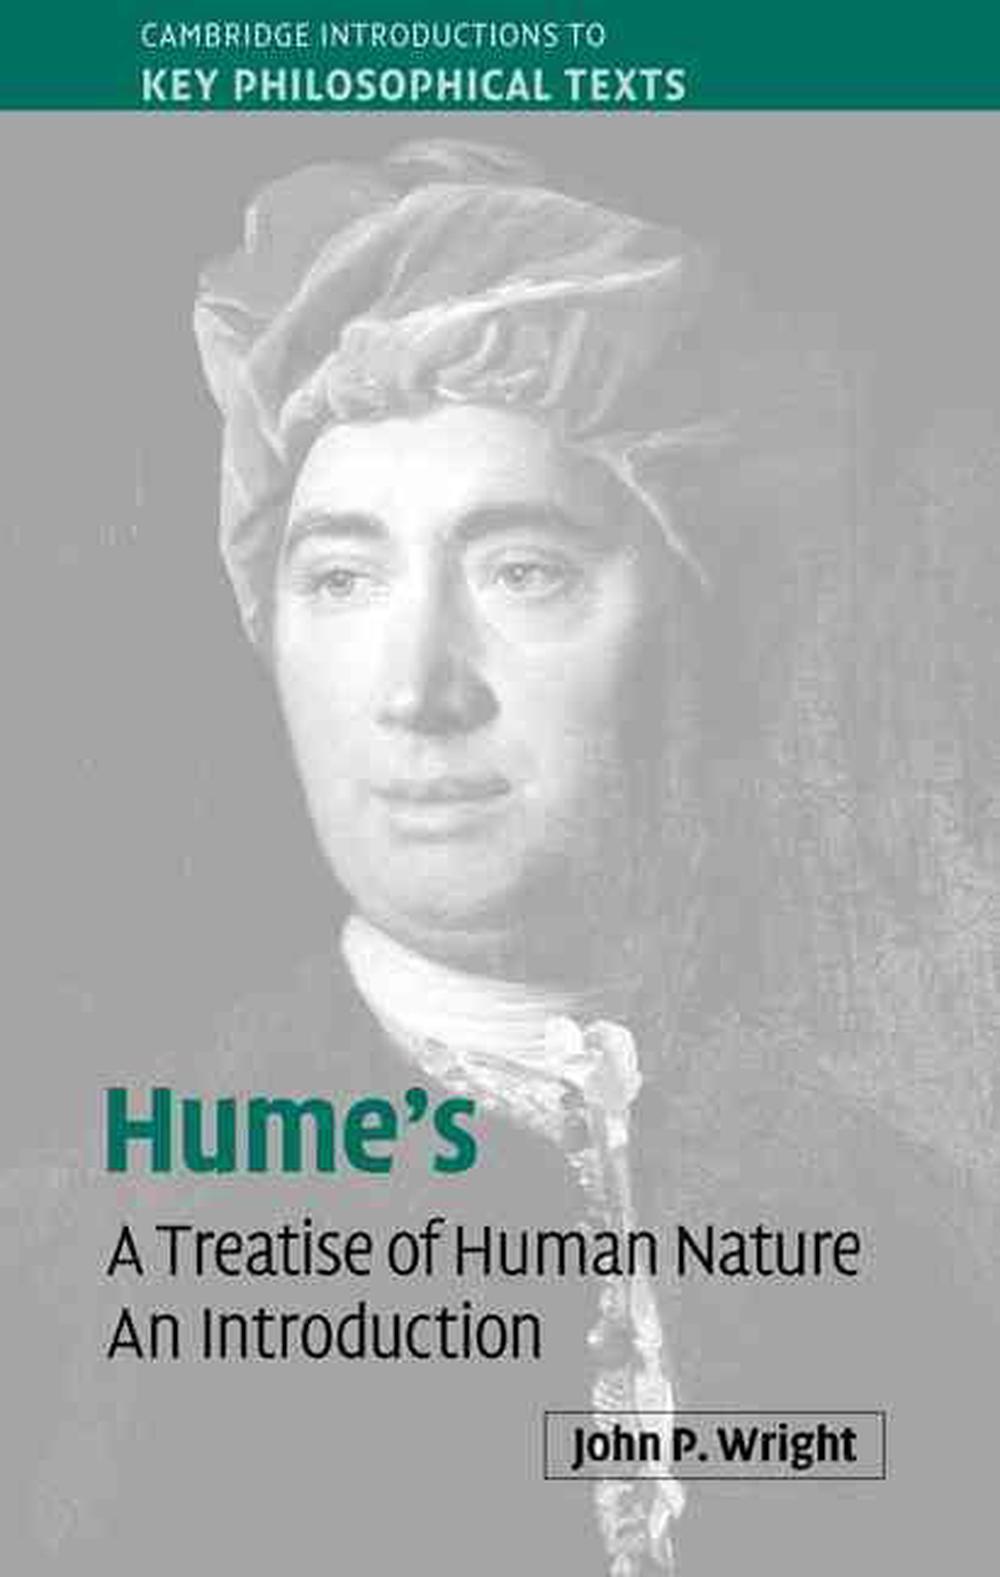 Hume&#039;s &#039;A Treatise of Human Nature&#039;: An Introduction